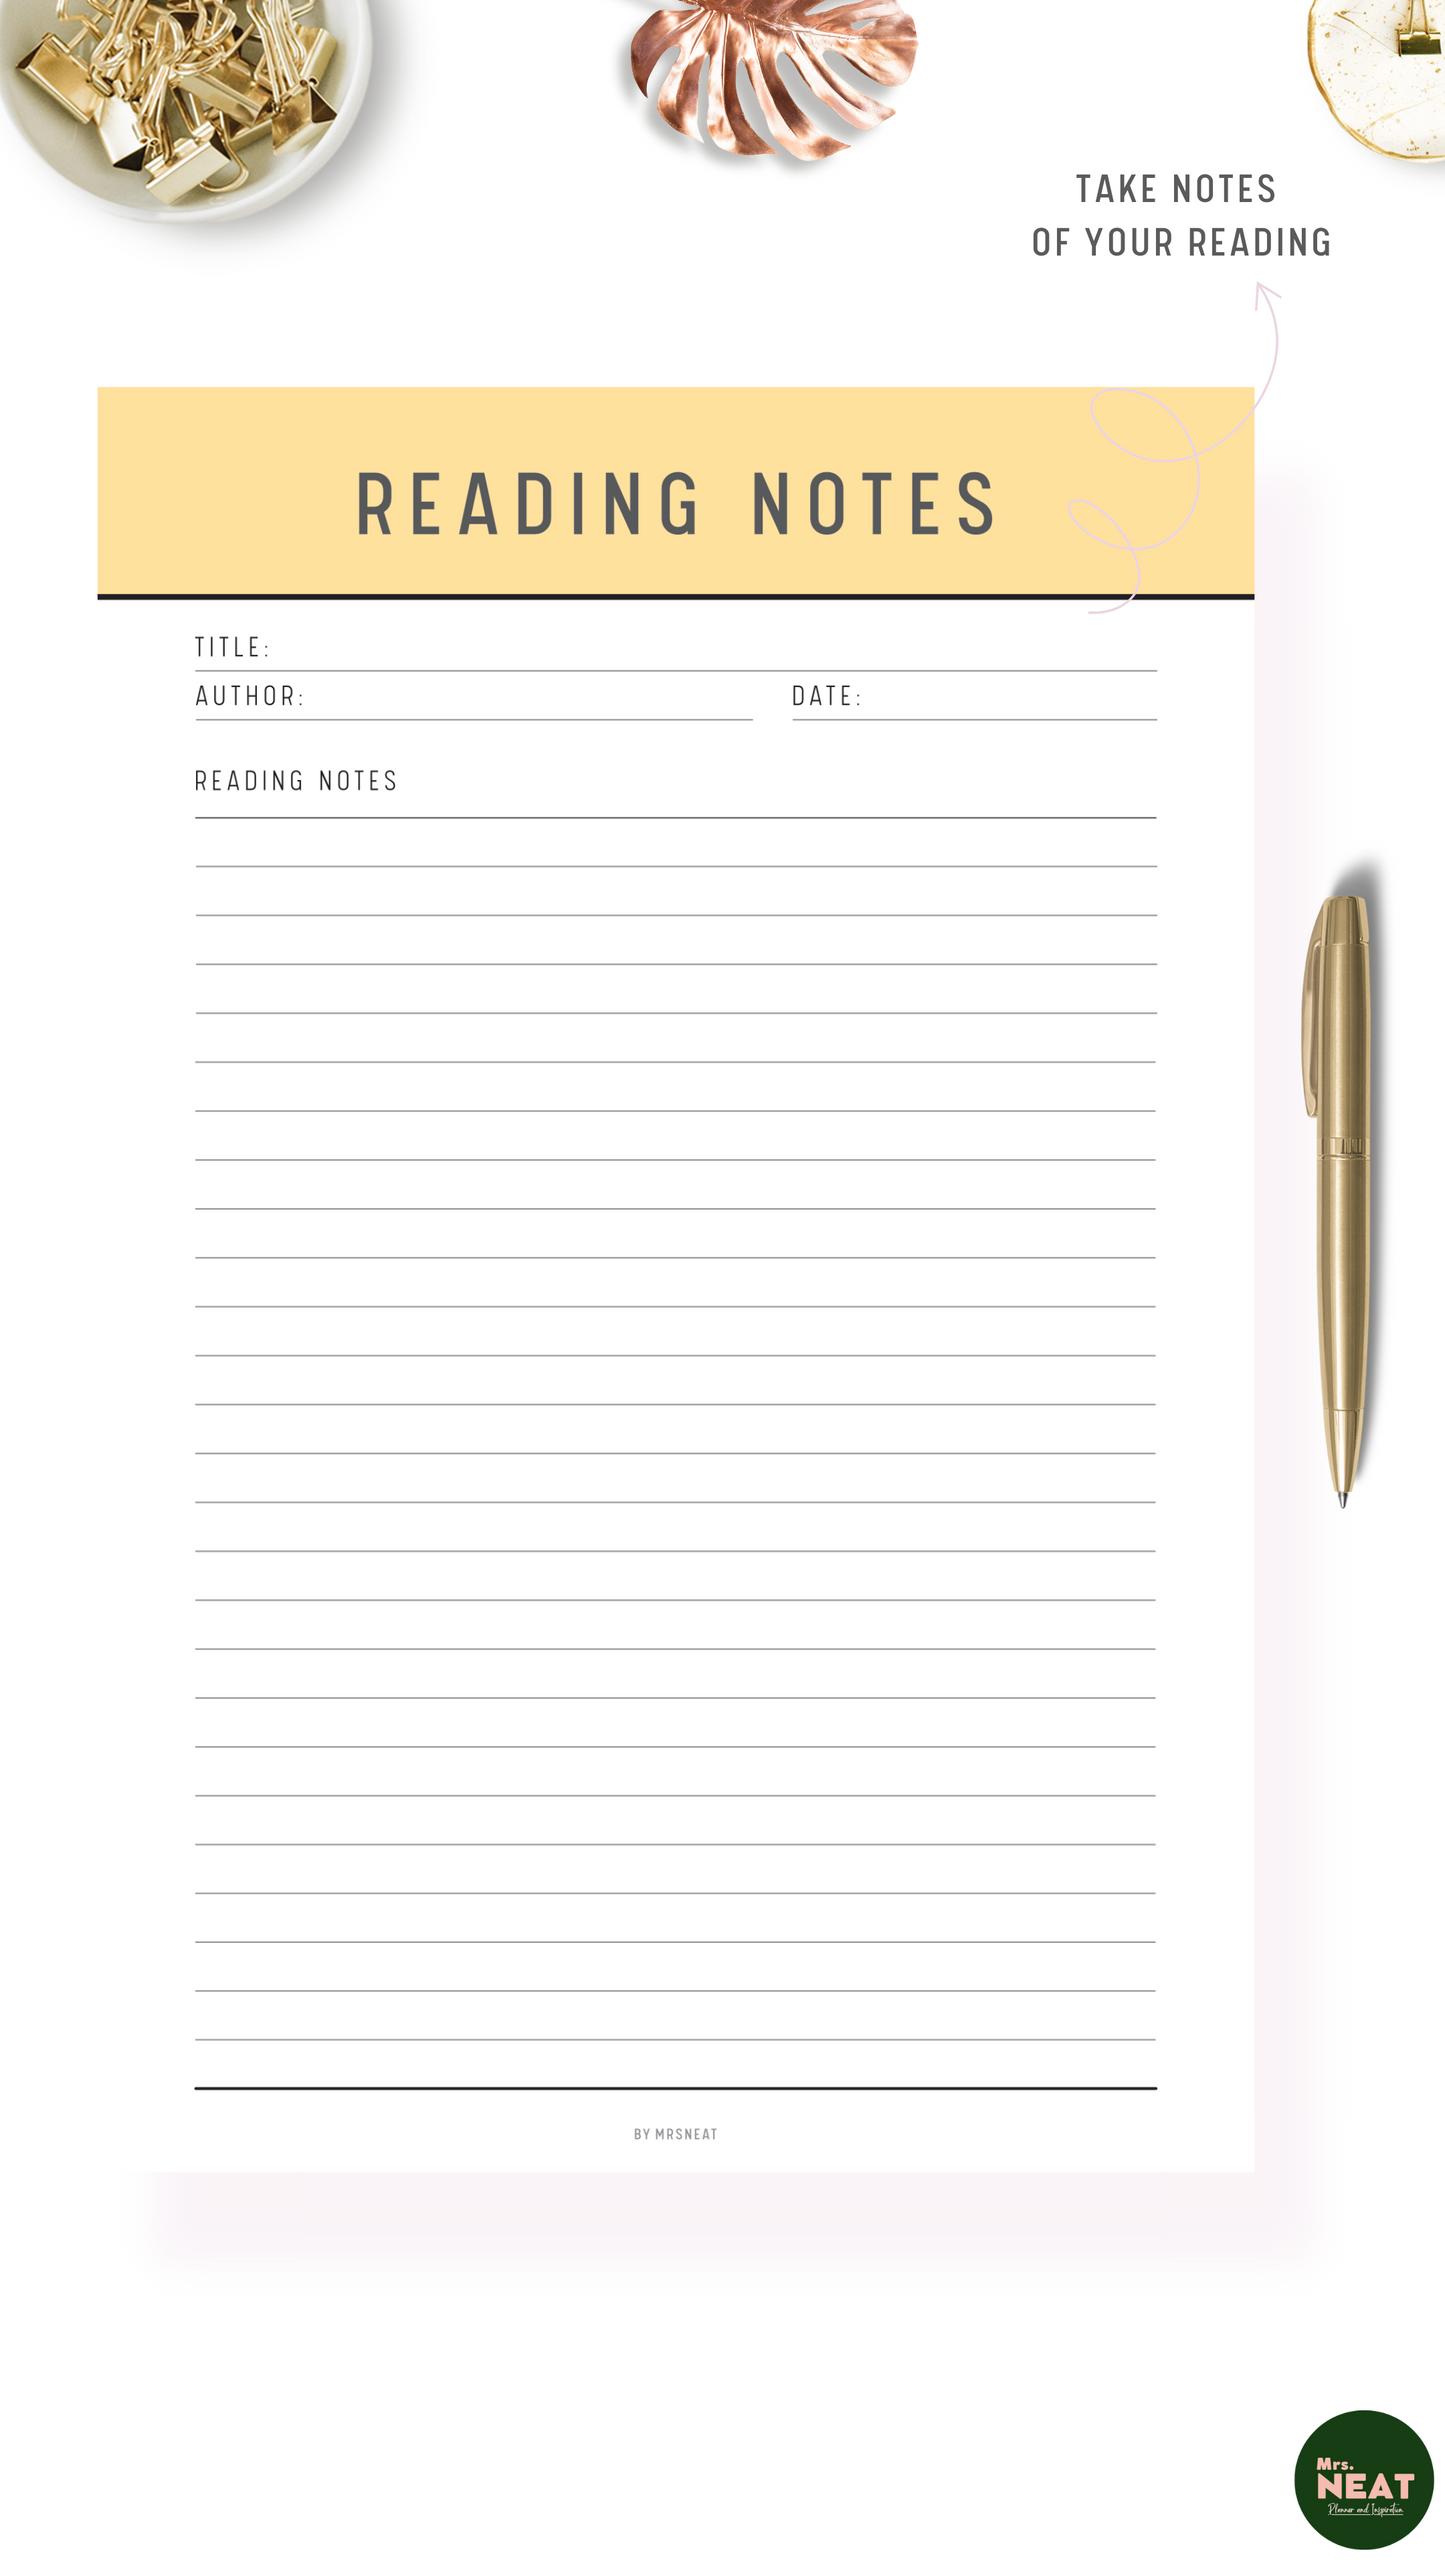 Remarkable Yellow Reading Notes with room for book title, book author, reading date and notes